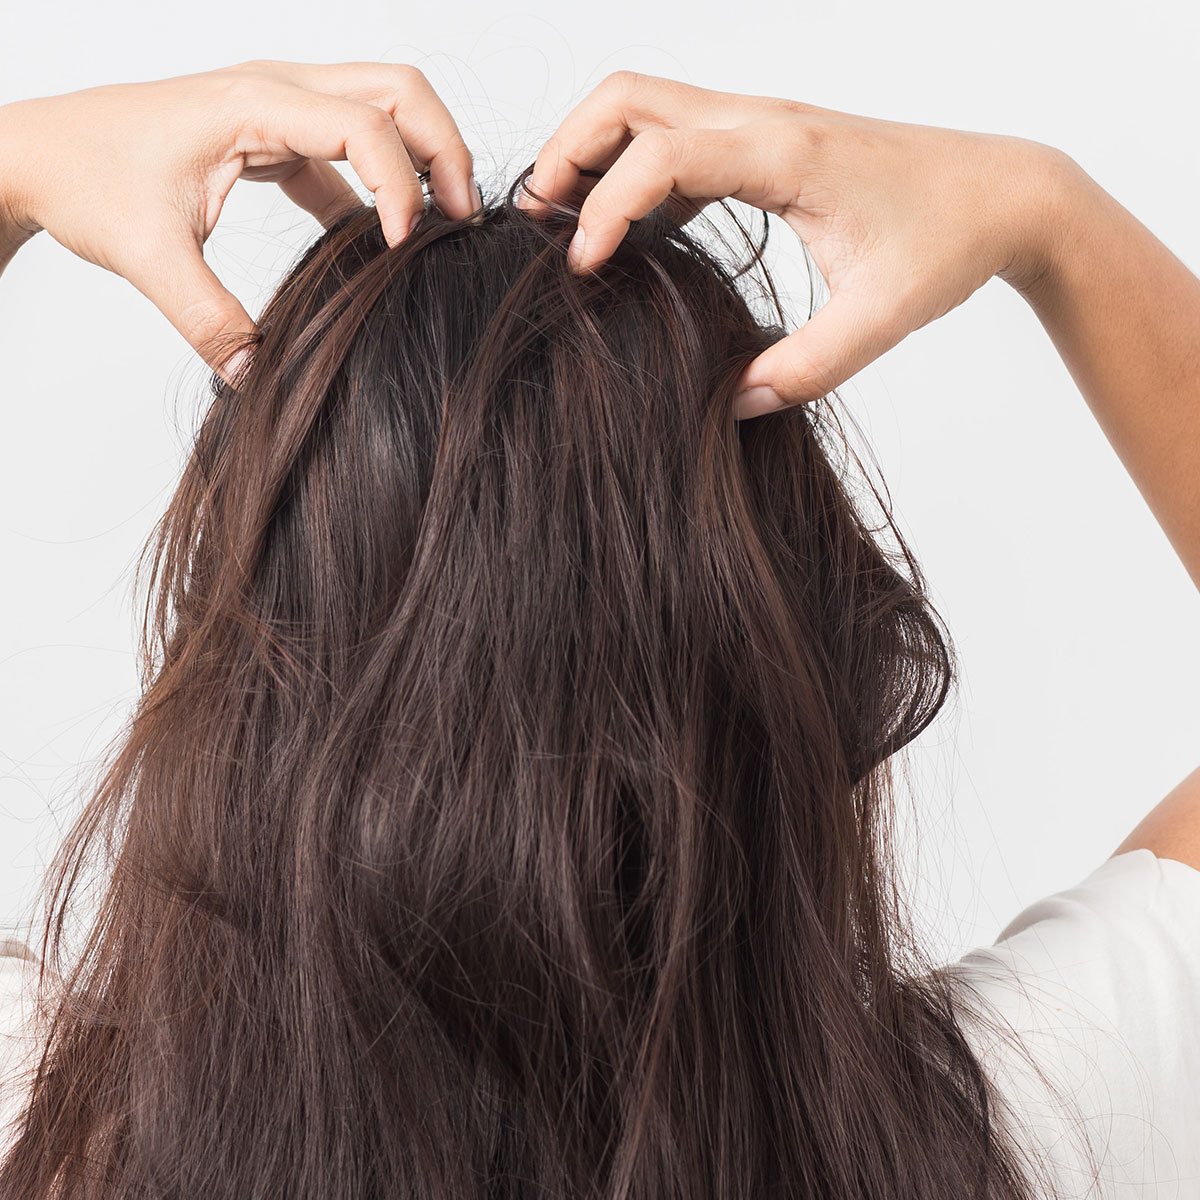 How To Massage Your Scalp: A Step-by-Step Guide (+ Benefits) - SHEfinds